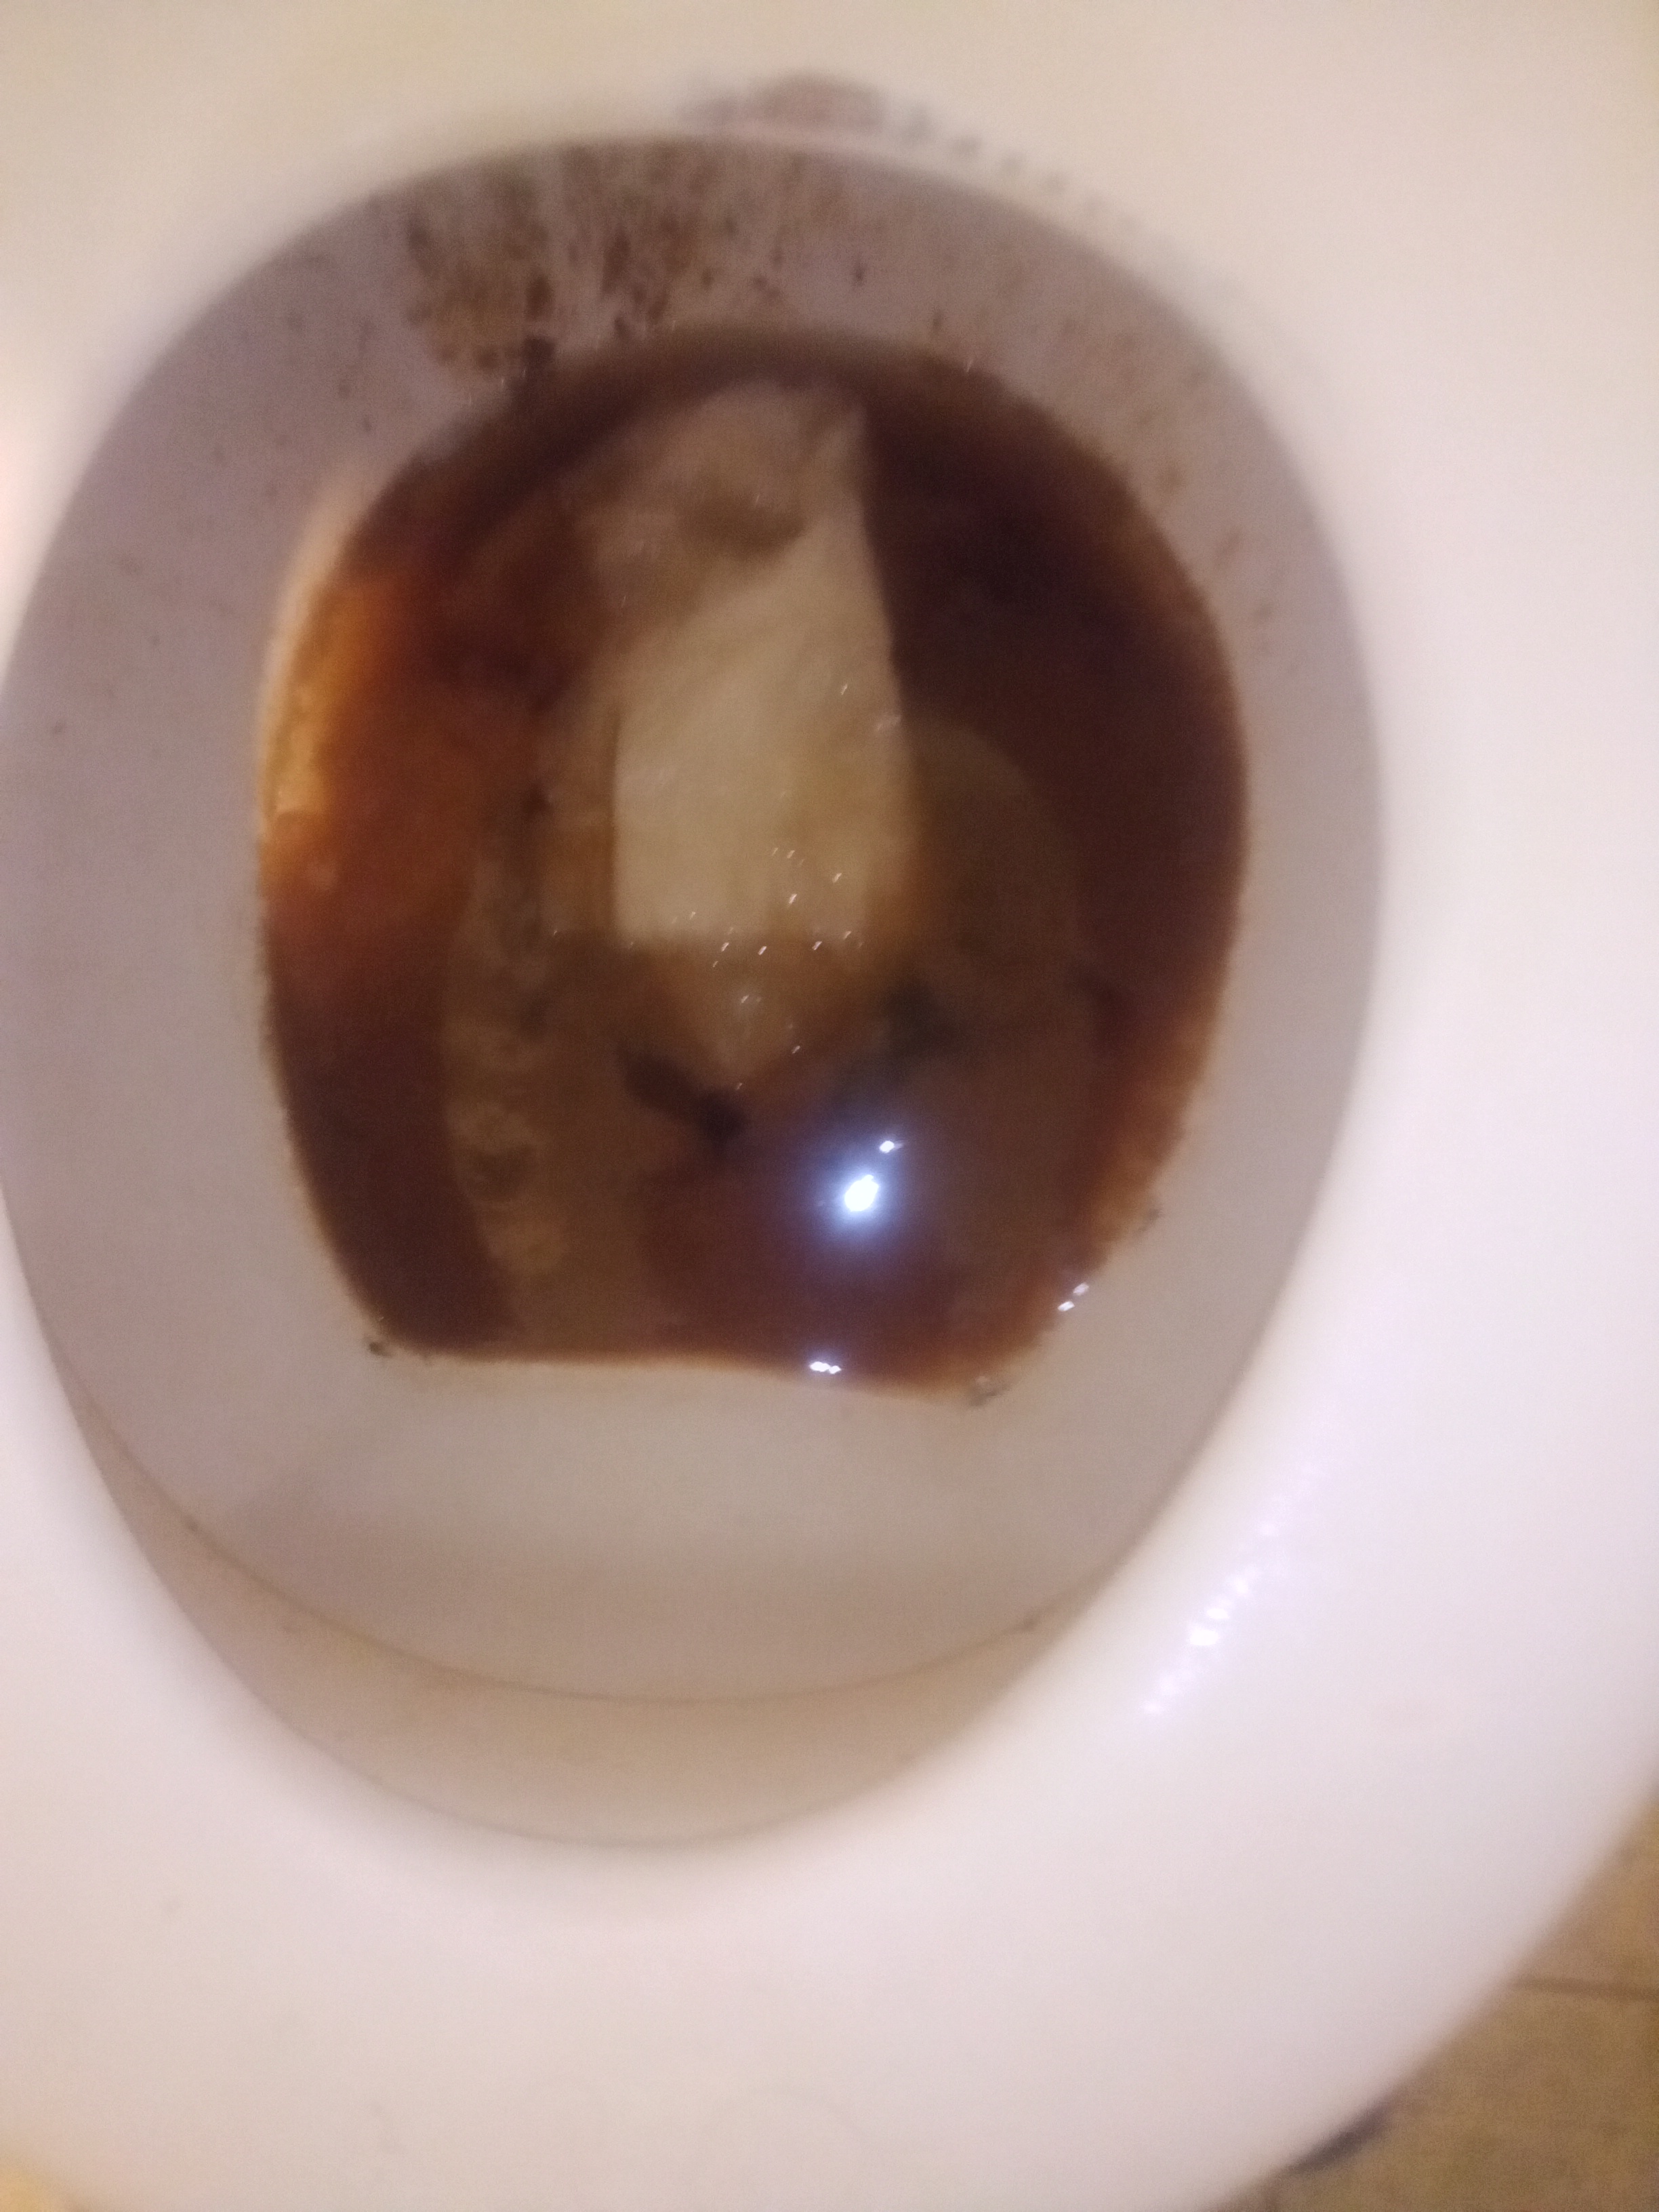 Diarrhea with wet farts from prune juice